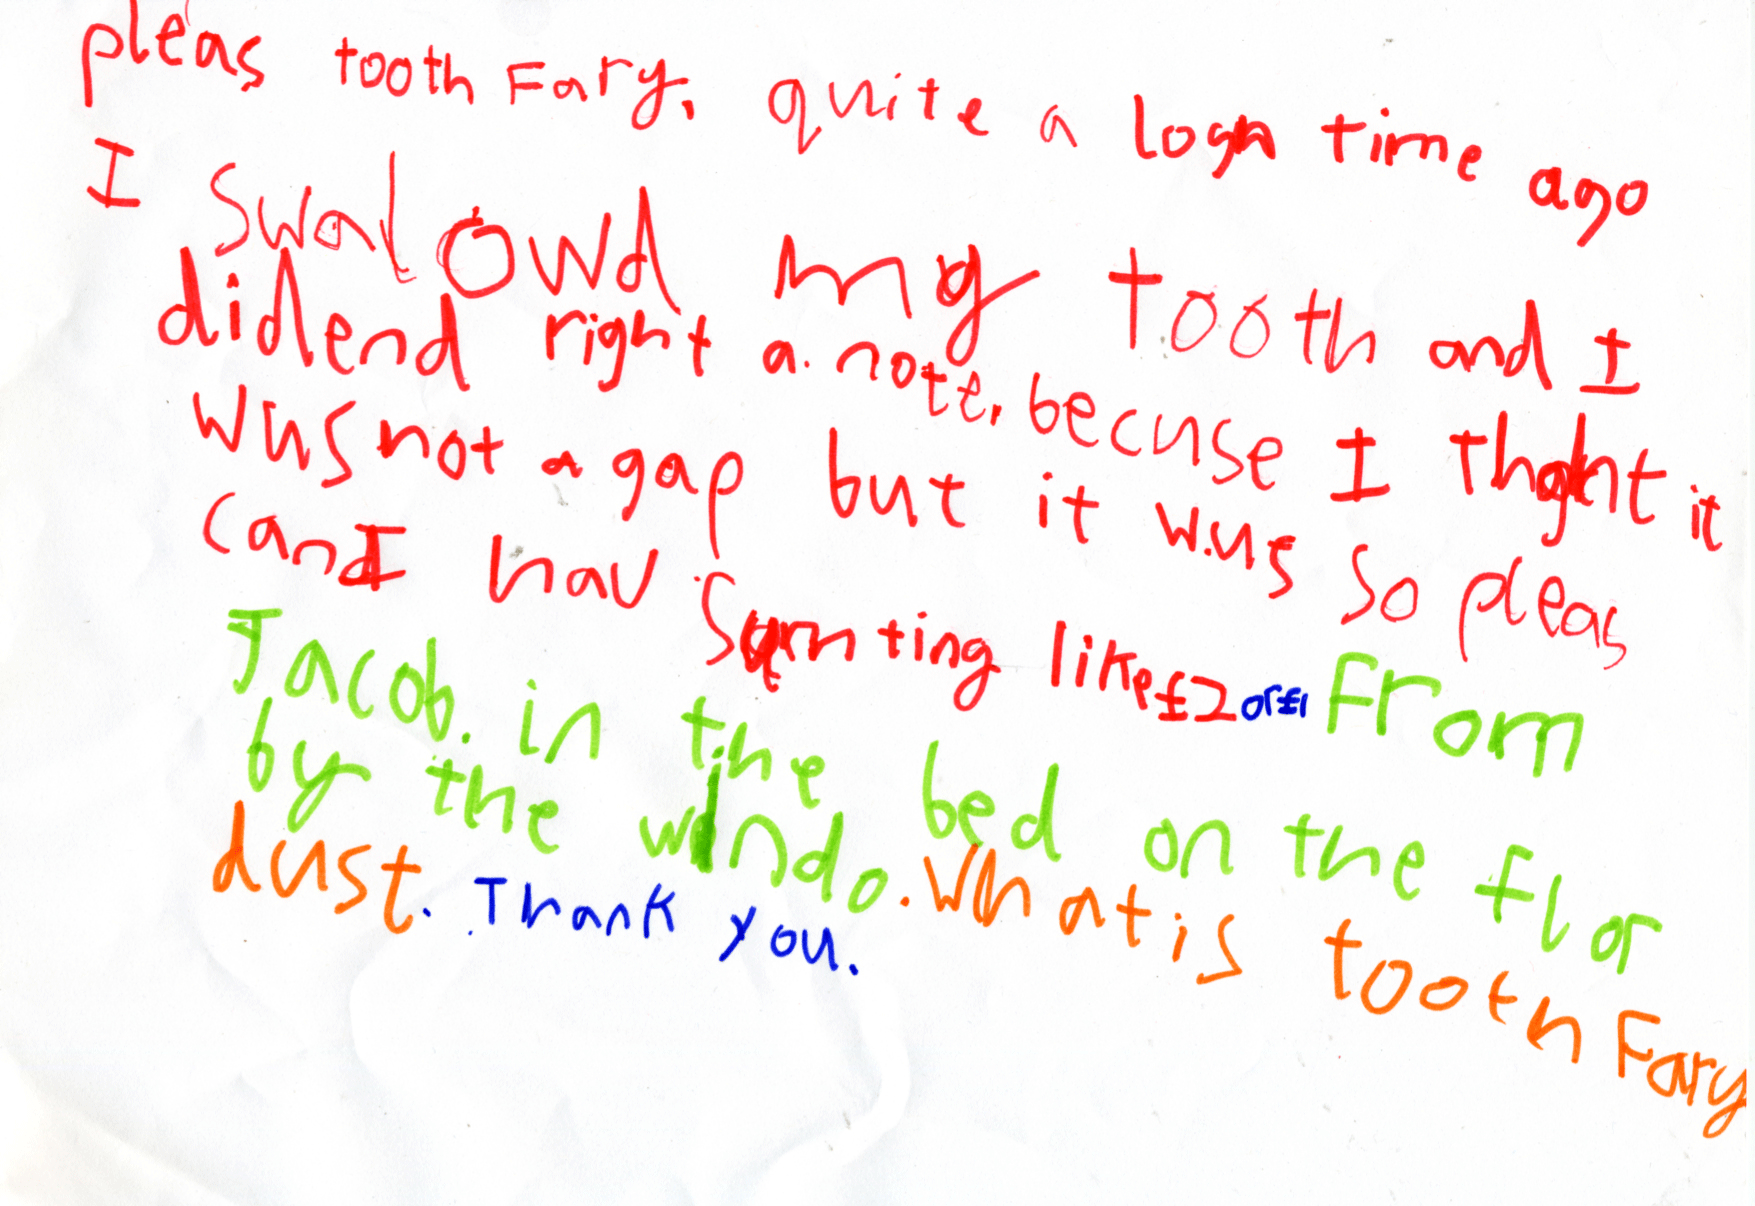 i found your tooth toothfairy letter